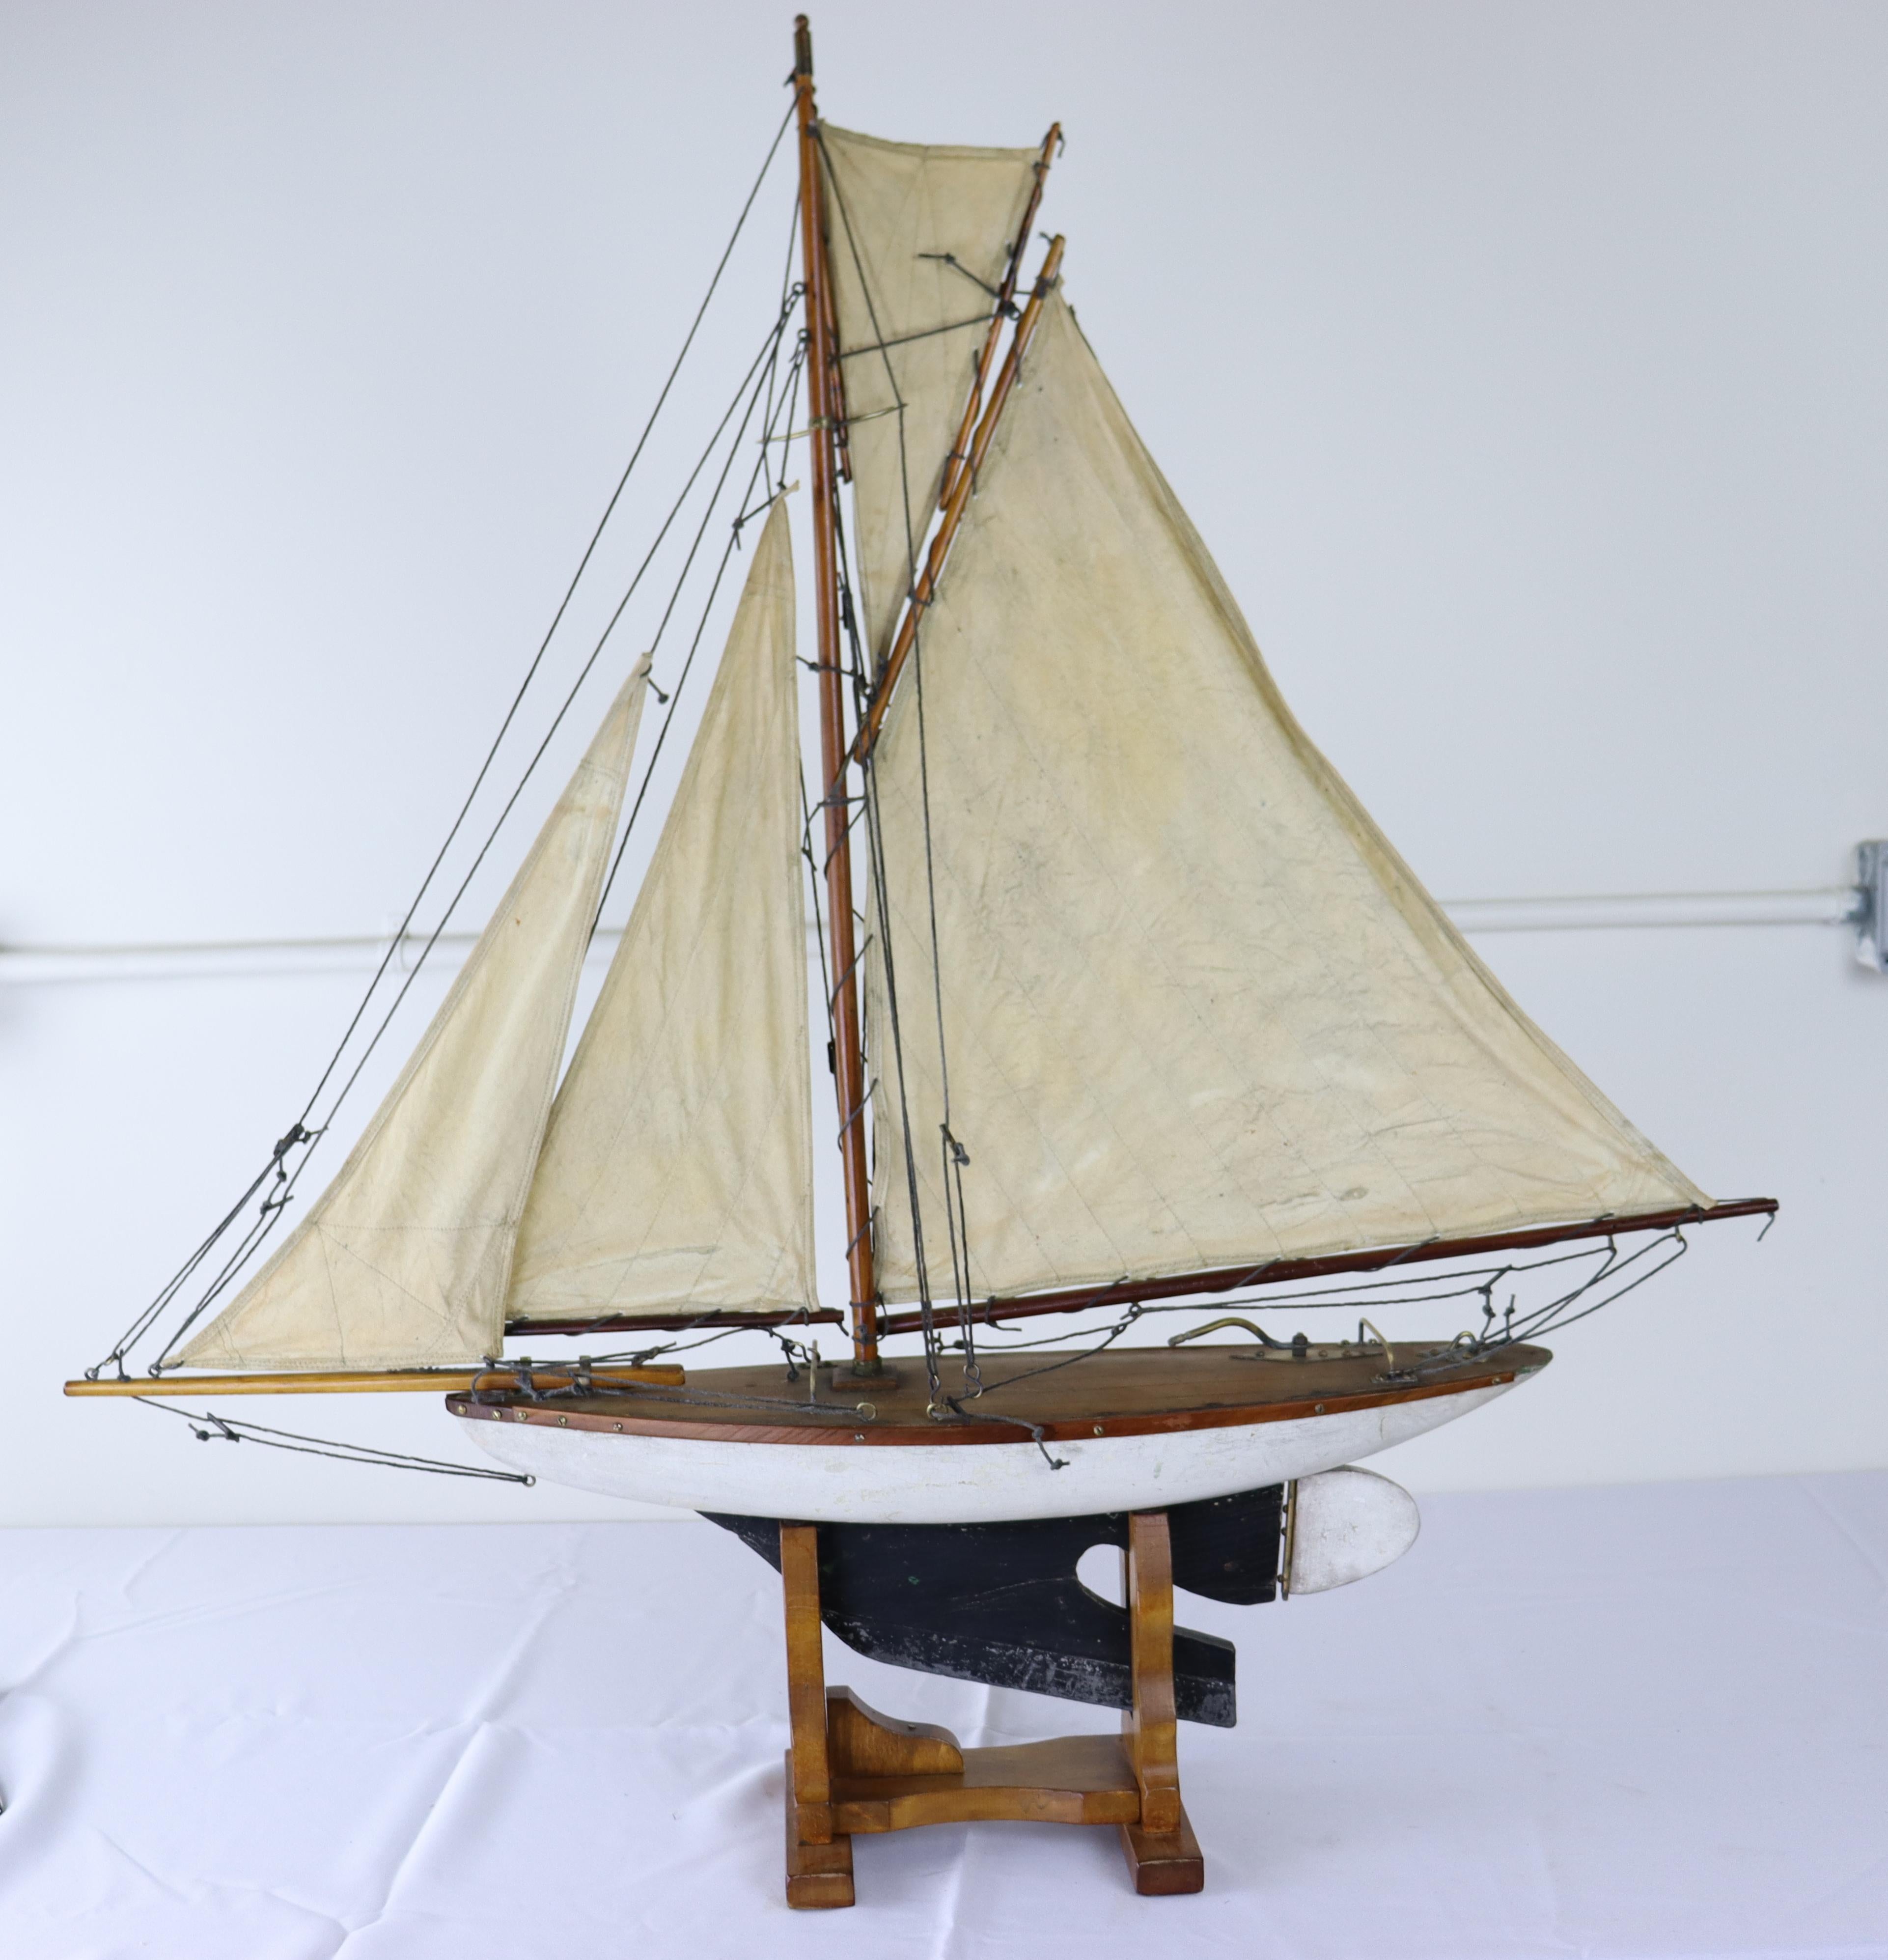 A charming vintage model yacht with sails made from old sail cloth and original brass accents. Stand is recent to hold the ship upright and stabile.  Measurements include the stand.